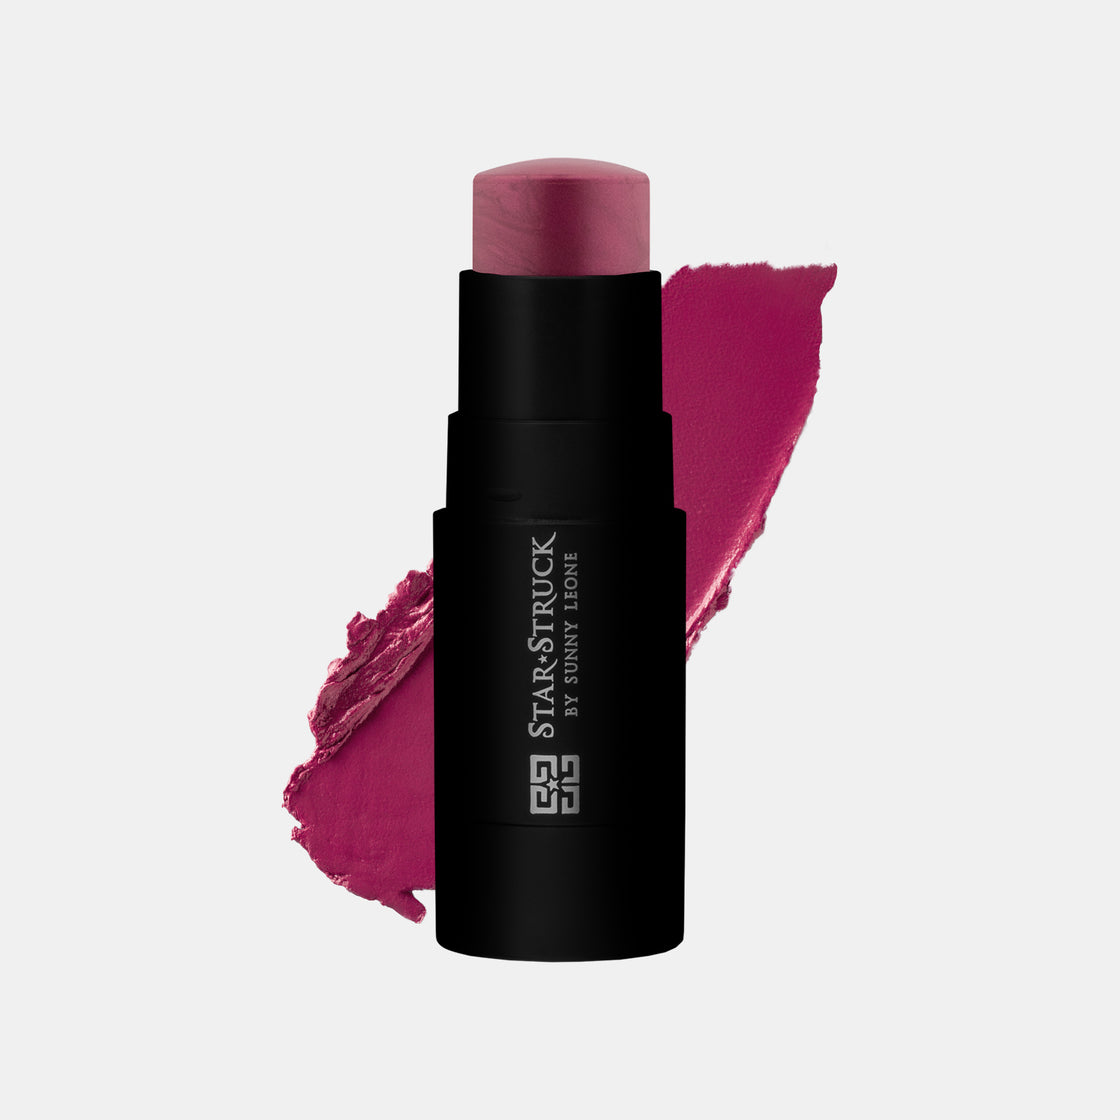 Crayberry - Blush Stick, Water-resistant, Deep Pink | 7gms